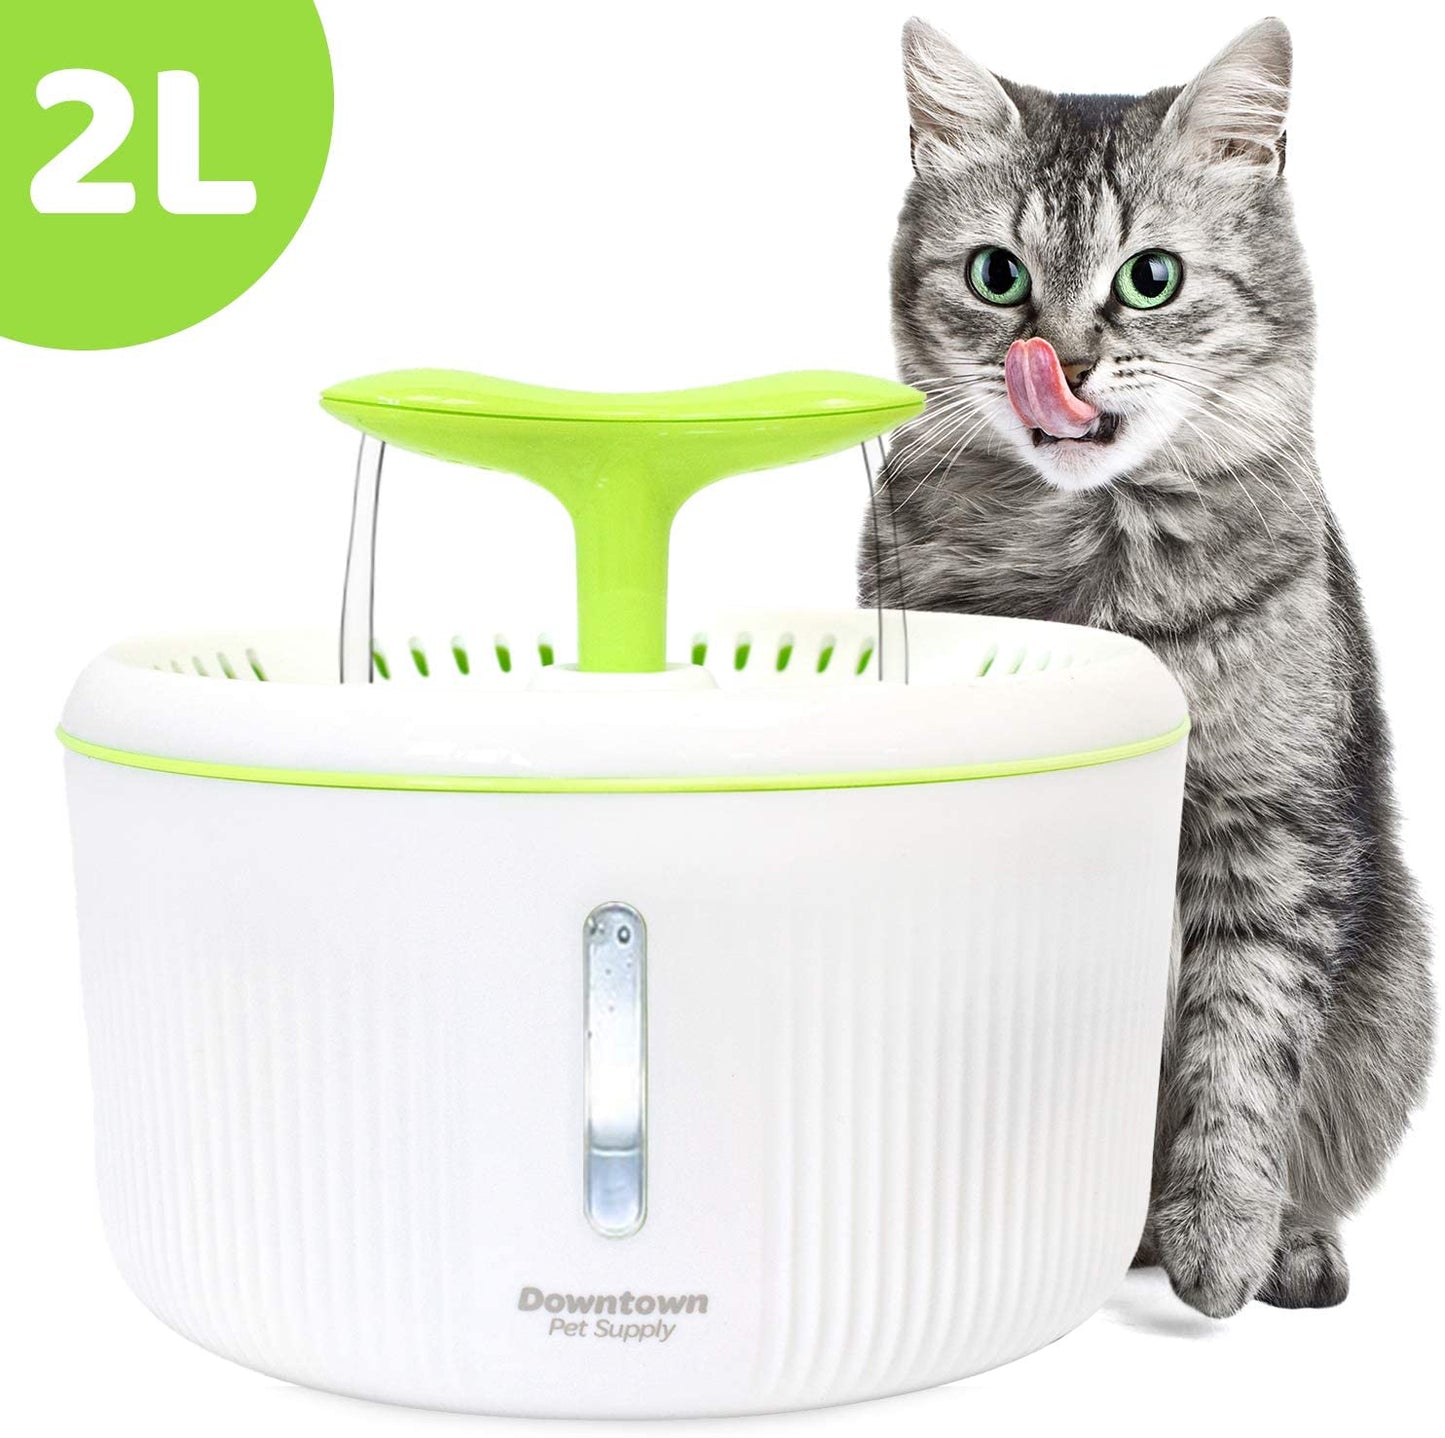 Dog Cat Automatic Pet Drinking Fountain, Ultra Quiet Water Dispenser Dual Nozzle Options with Filter Included for Cats and Dogs